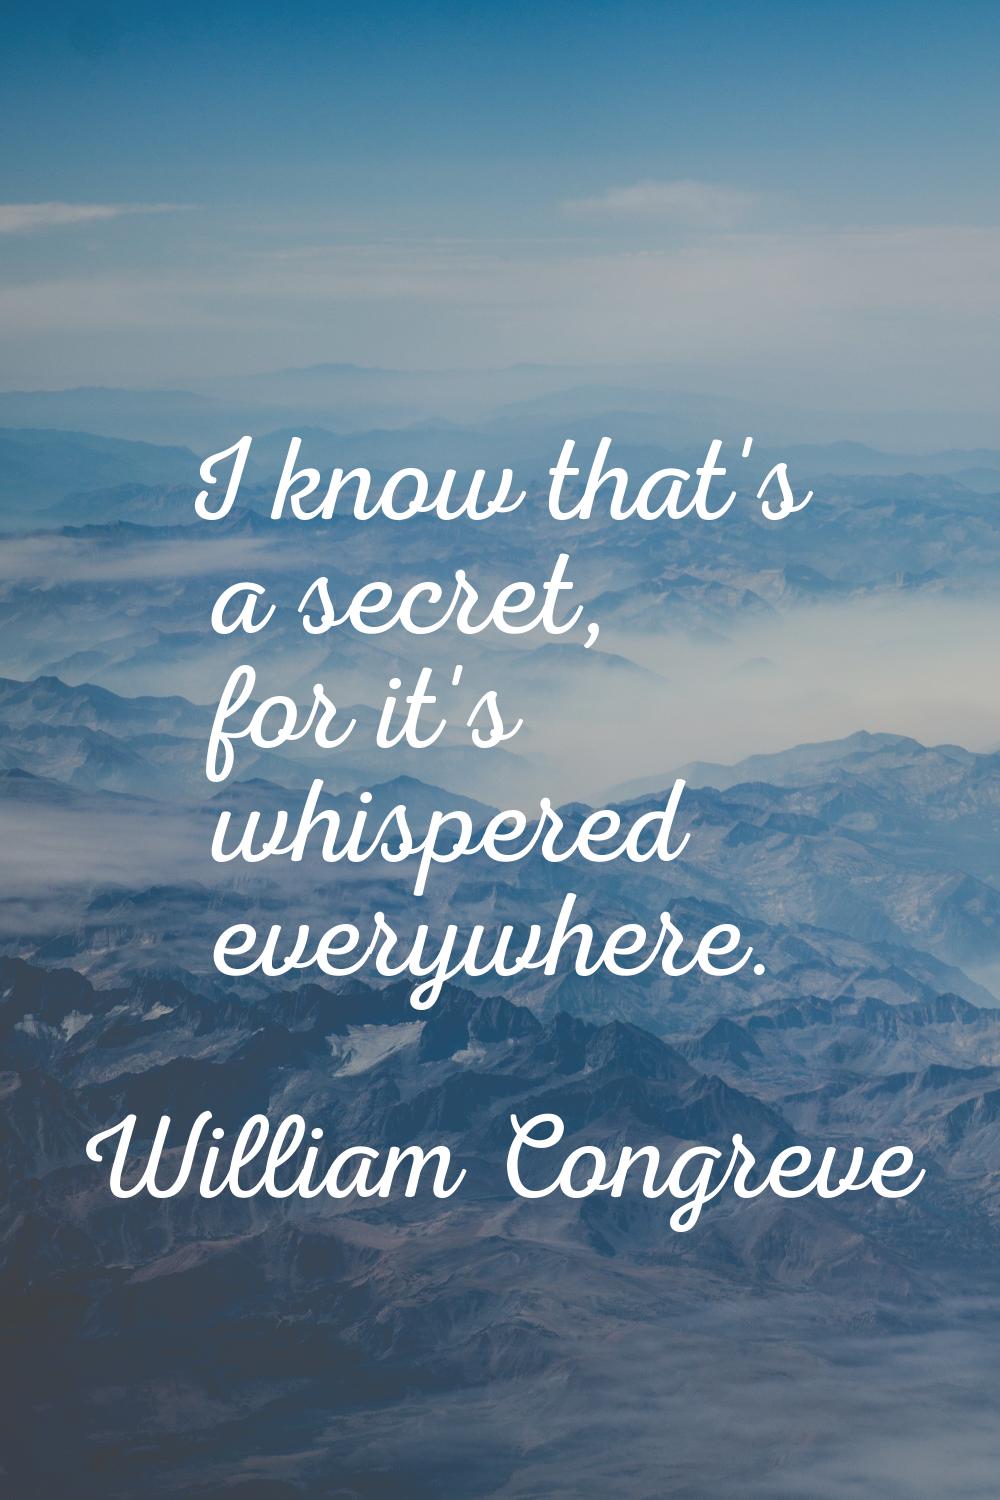 I know that's a secret, for it's whispered everywhere.